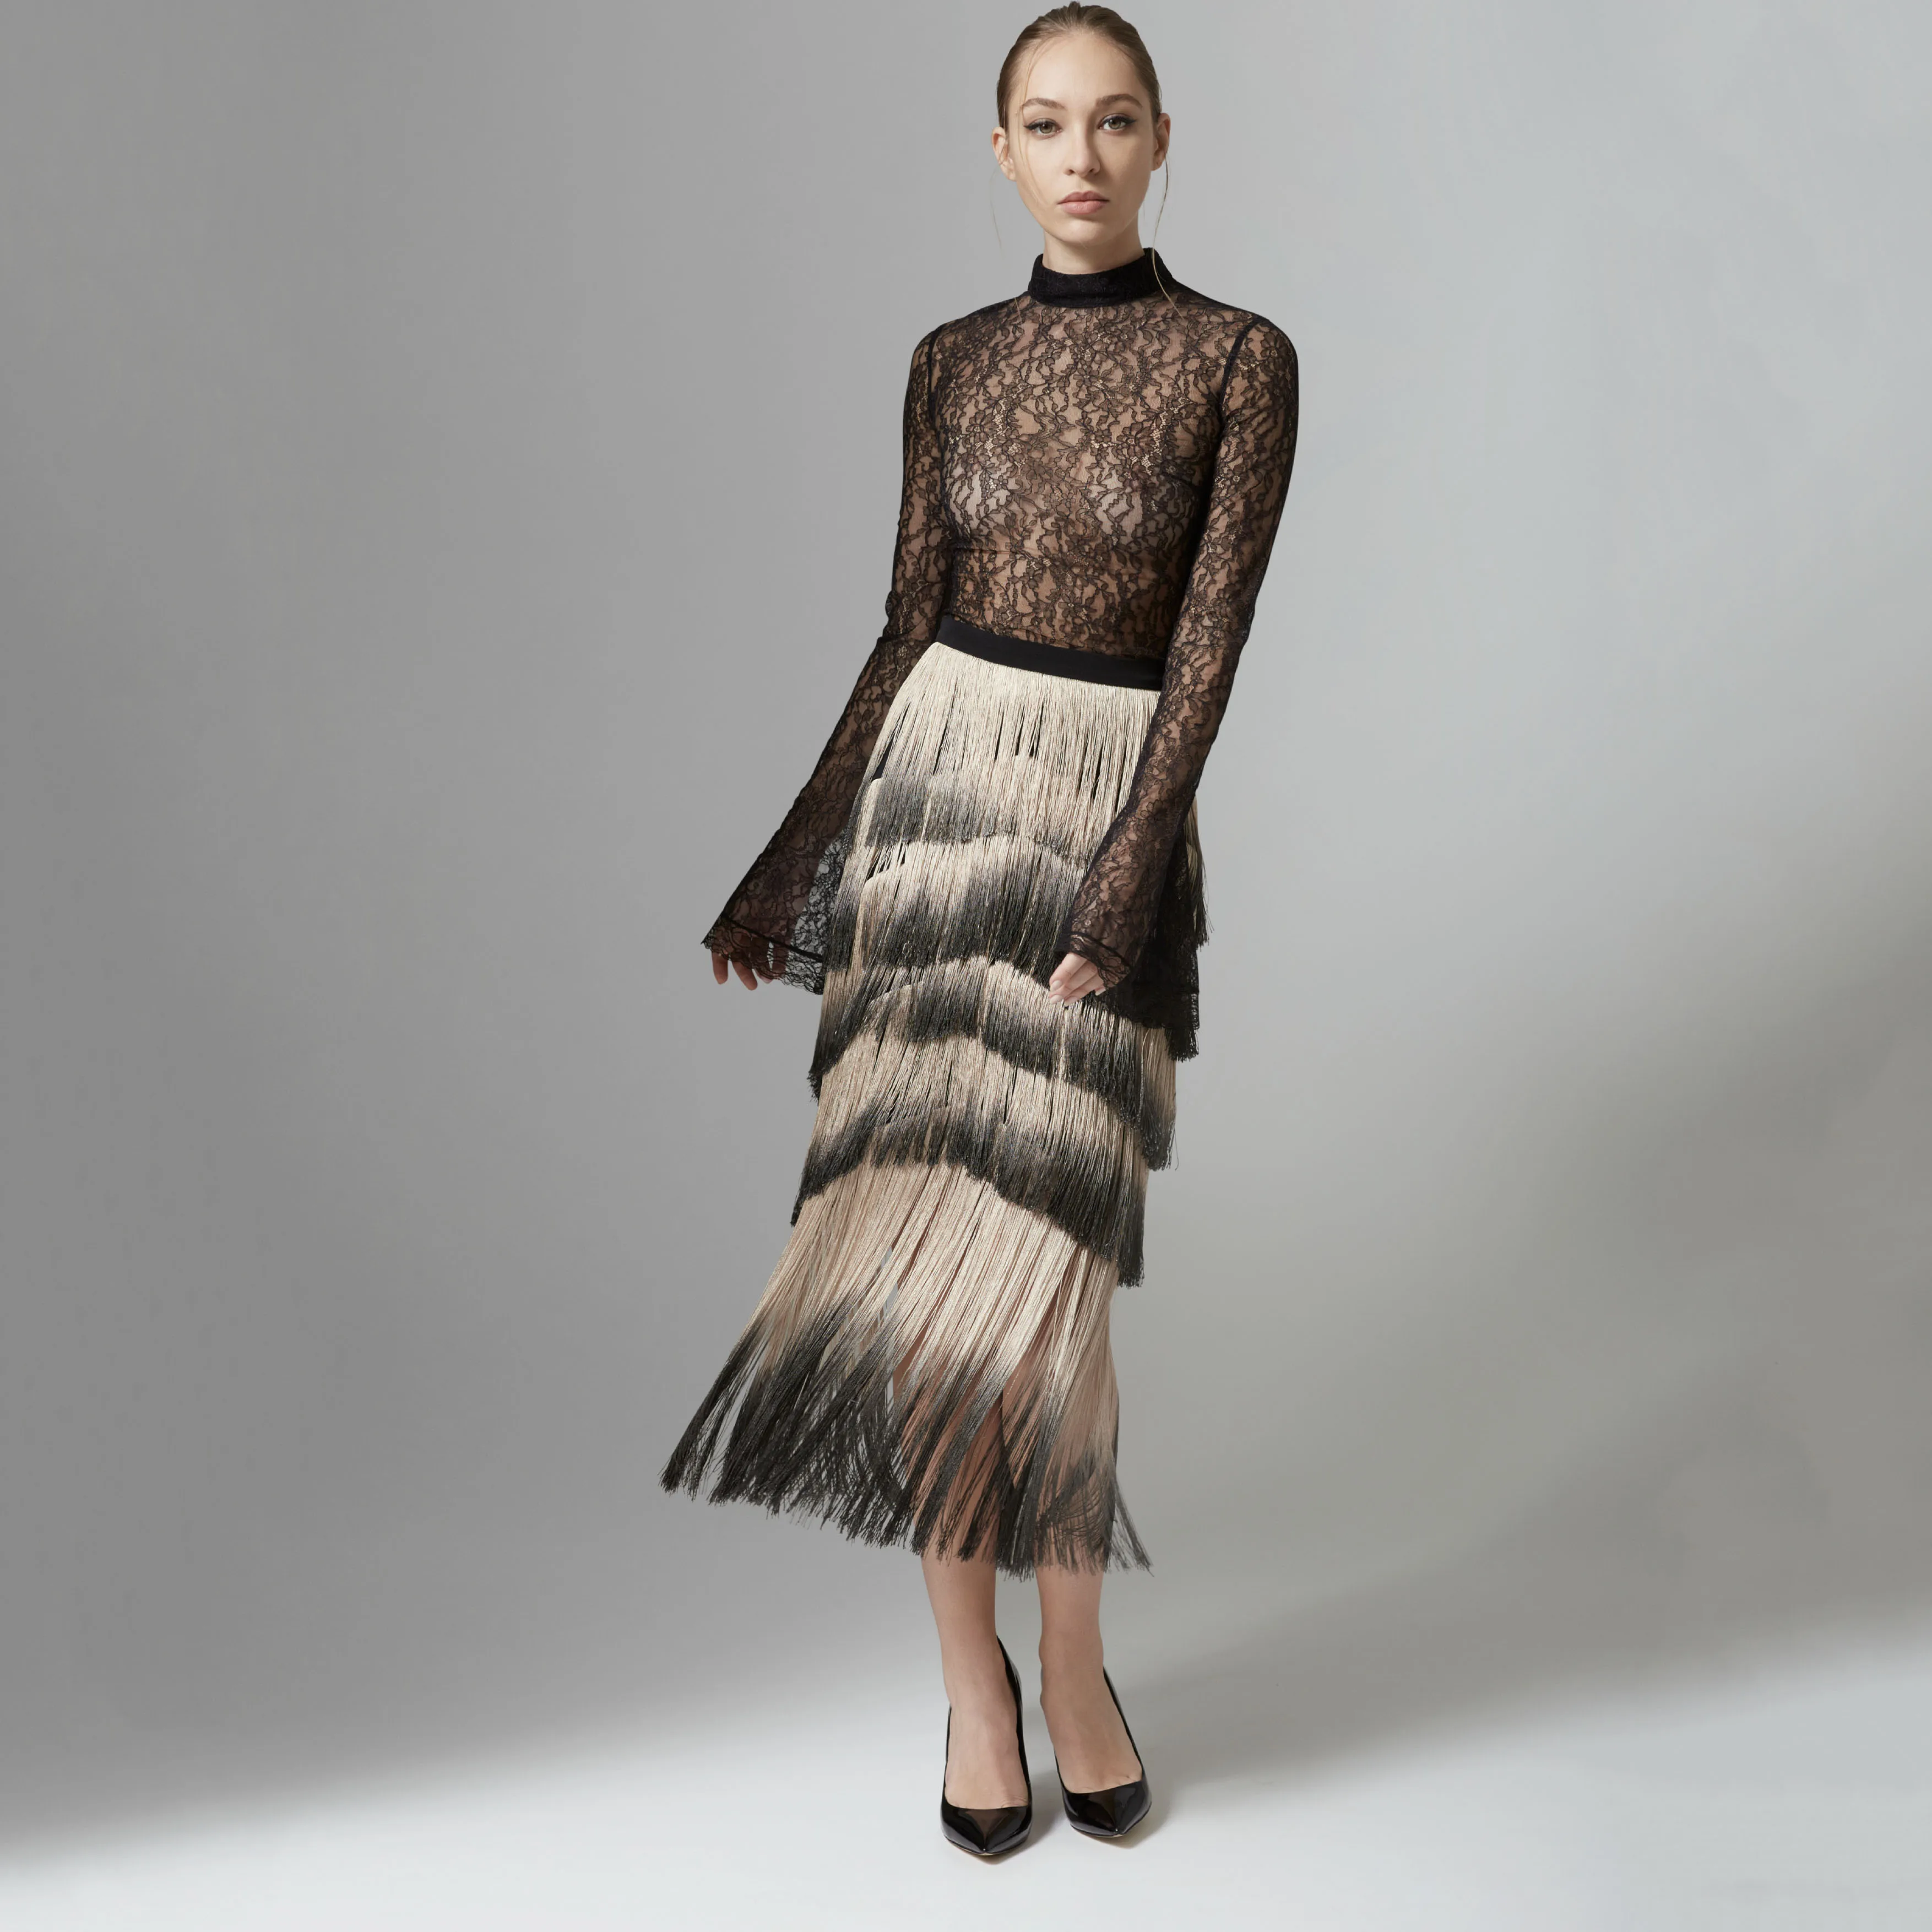 Straight Skirt with Hand-Shaded Fringes Embroidery